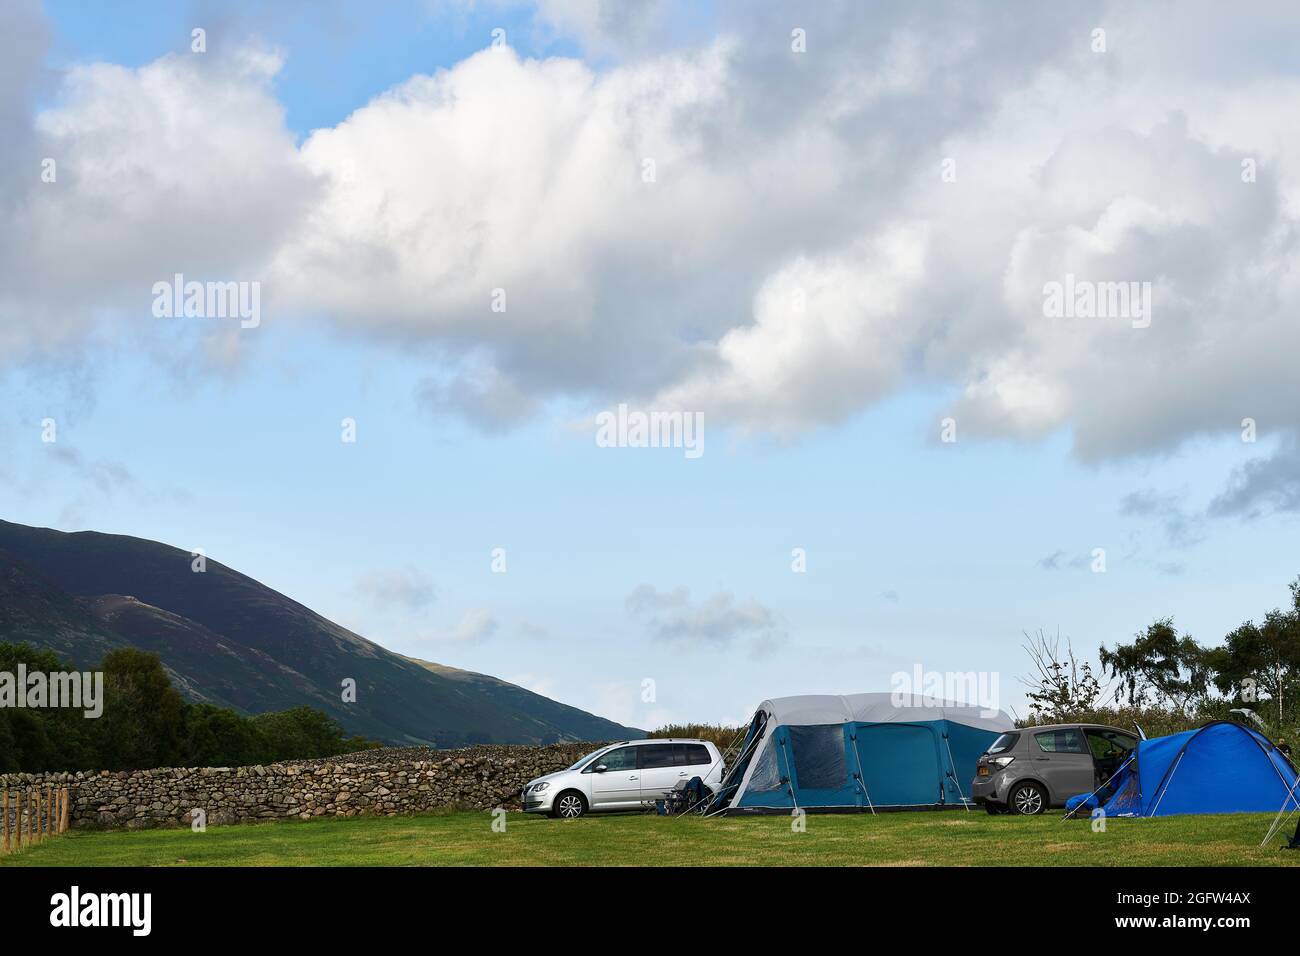 Tent camping on a farm field in the Lake District opposite the Blencathra (Saddleback) fell on a cloudy, misty summer day. Stock Photo